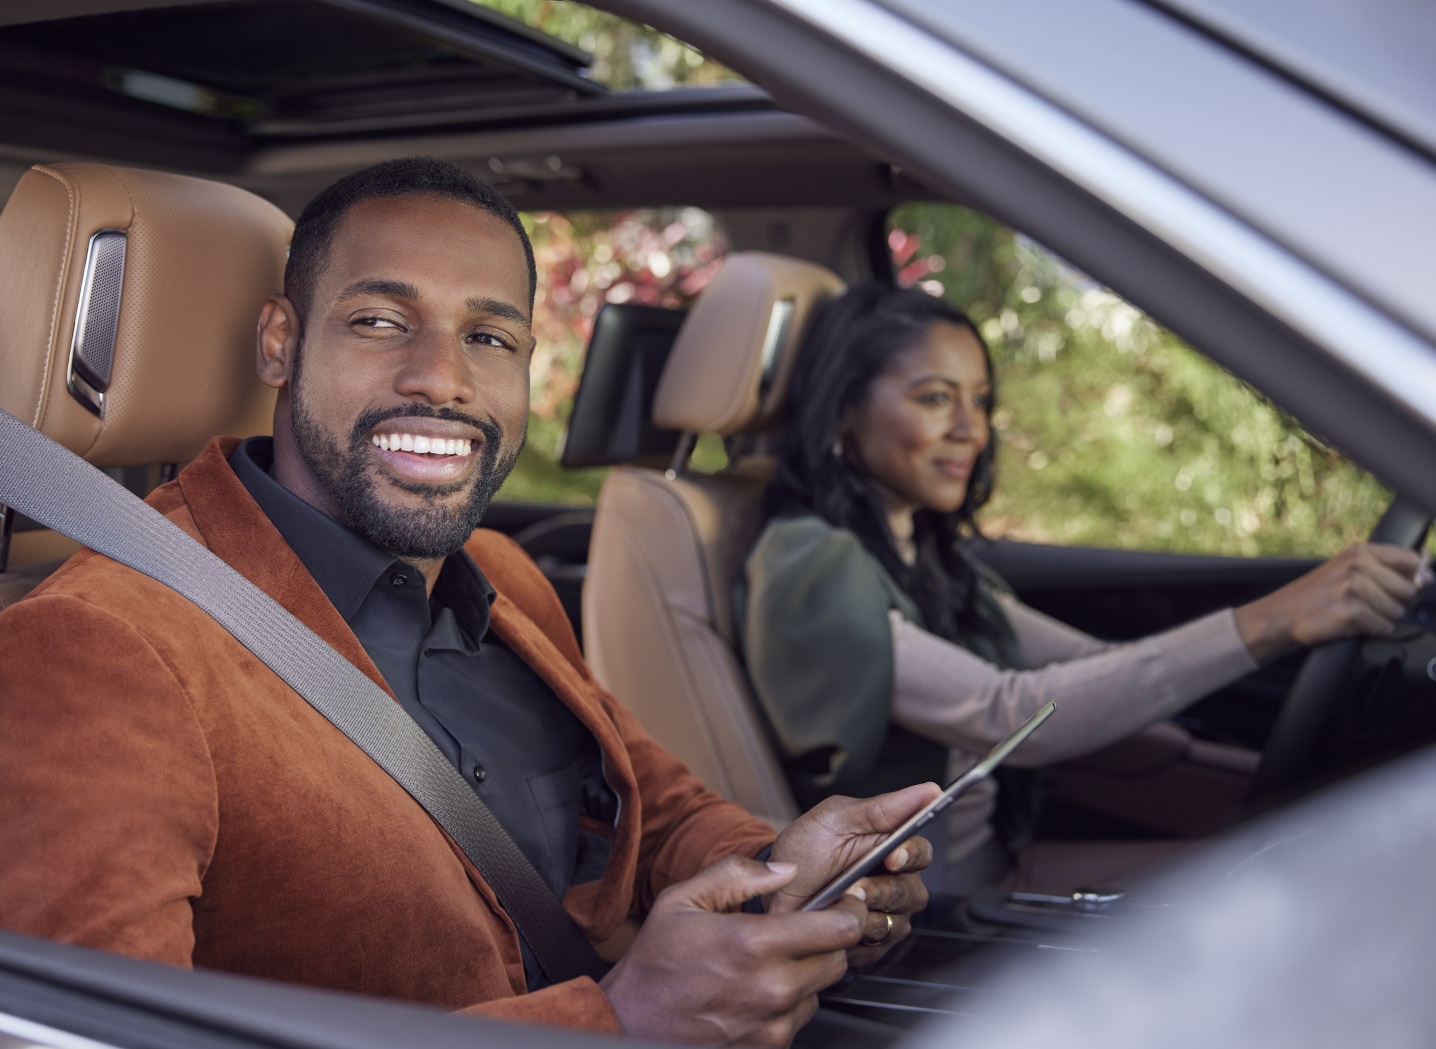 Couple in a car with the woman driving and the man smiling holding a tablet device